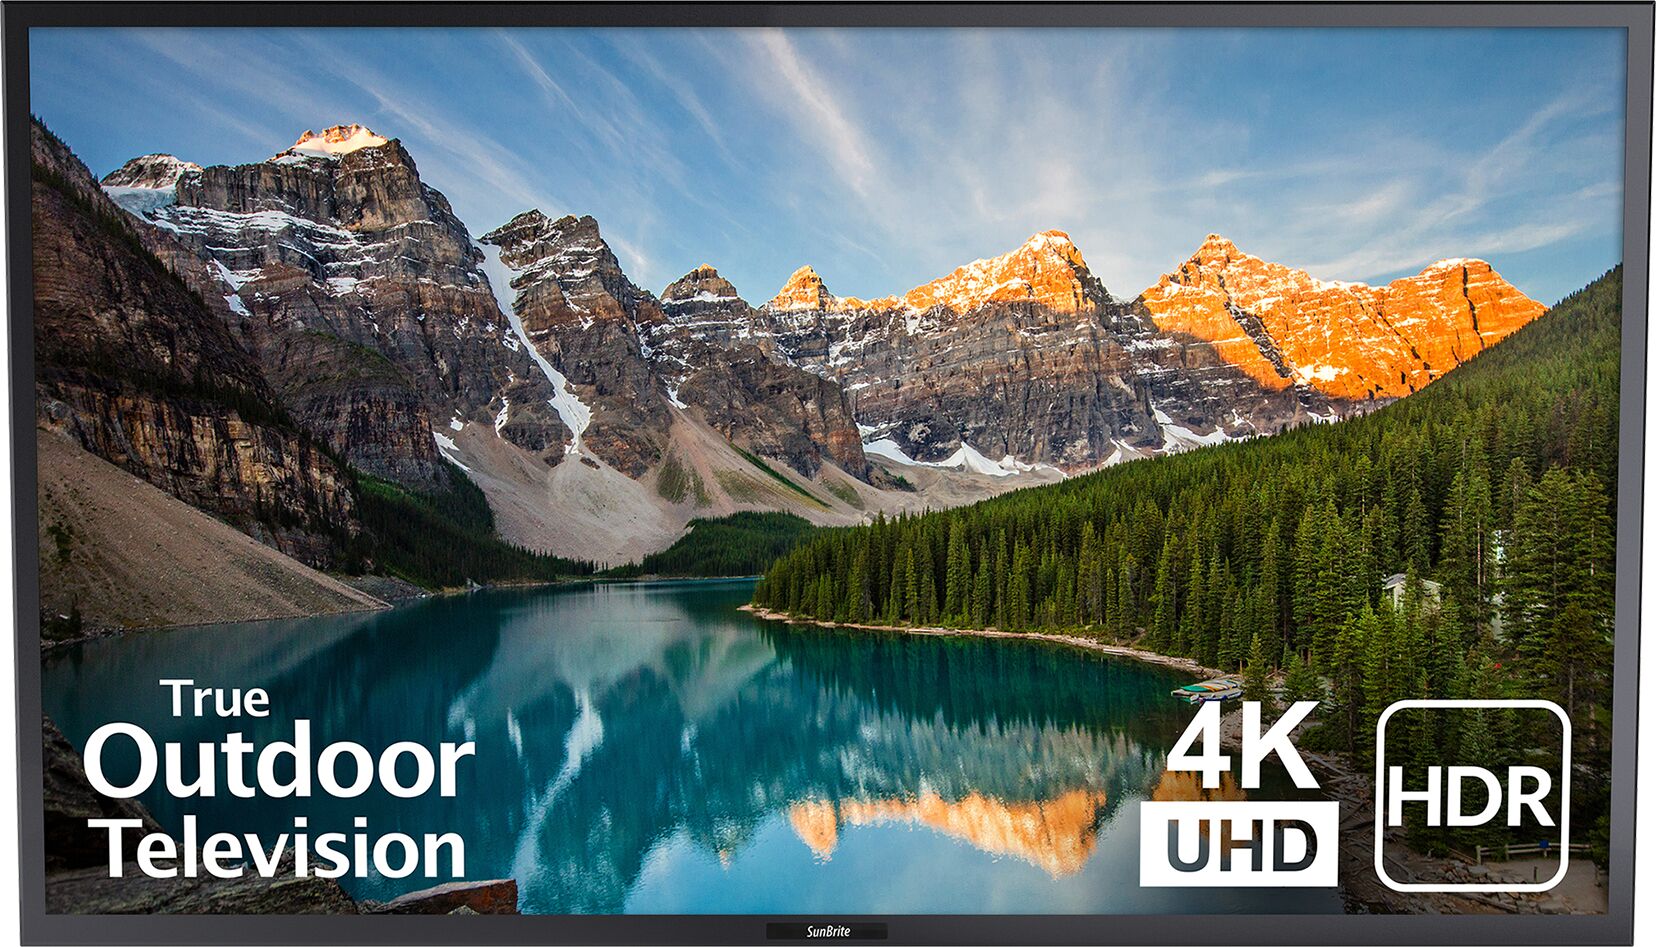 SunBrite Outdoor 4K, Upgrade Your Outdoor Space with a SunBrite Outdoor 4K TV, Days of a Domestic Dad